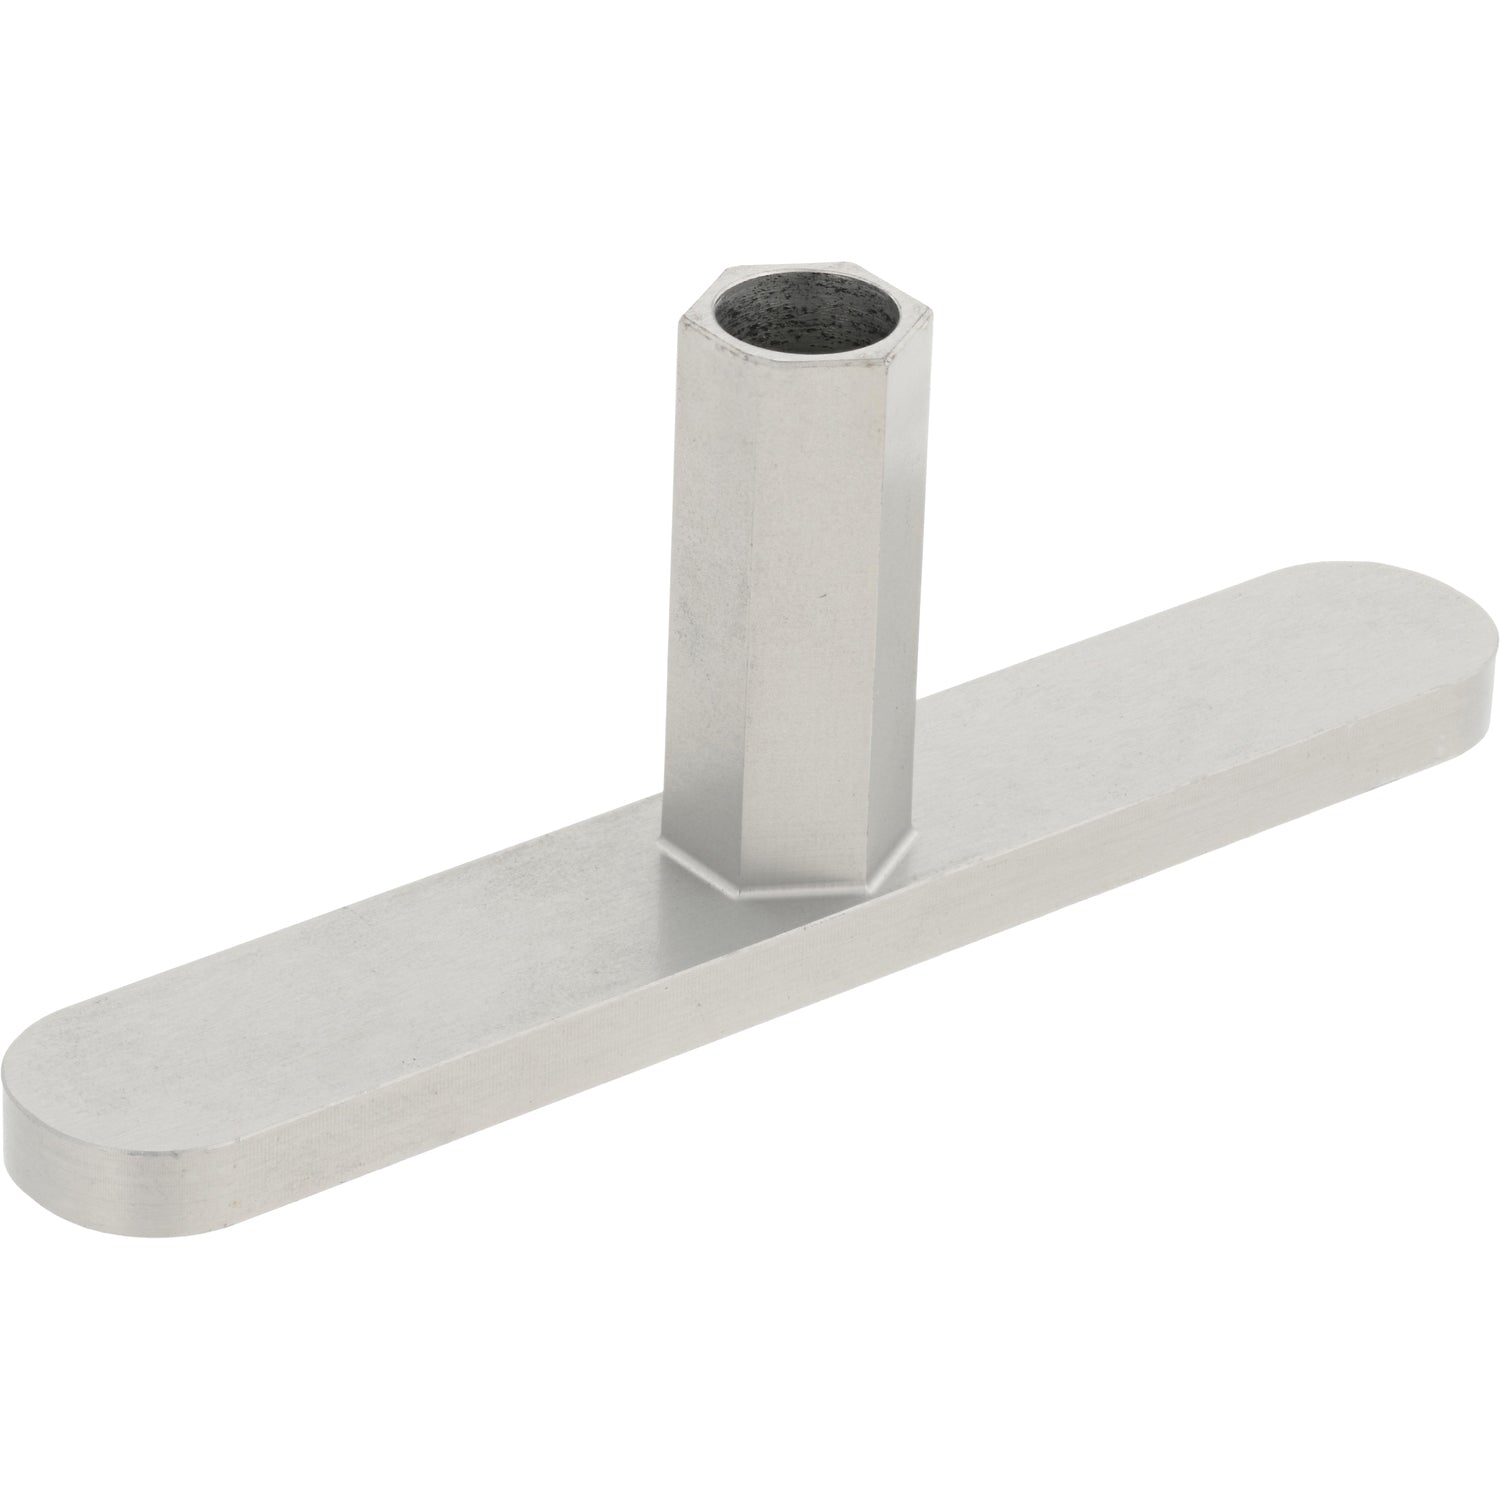 A "T" shaped part made of hard anodized aluminum with flat horizontal rounded handle and a vertical hollow hexagonal post shown on white background. 